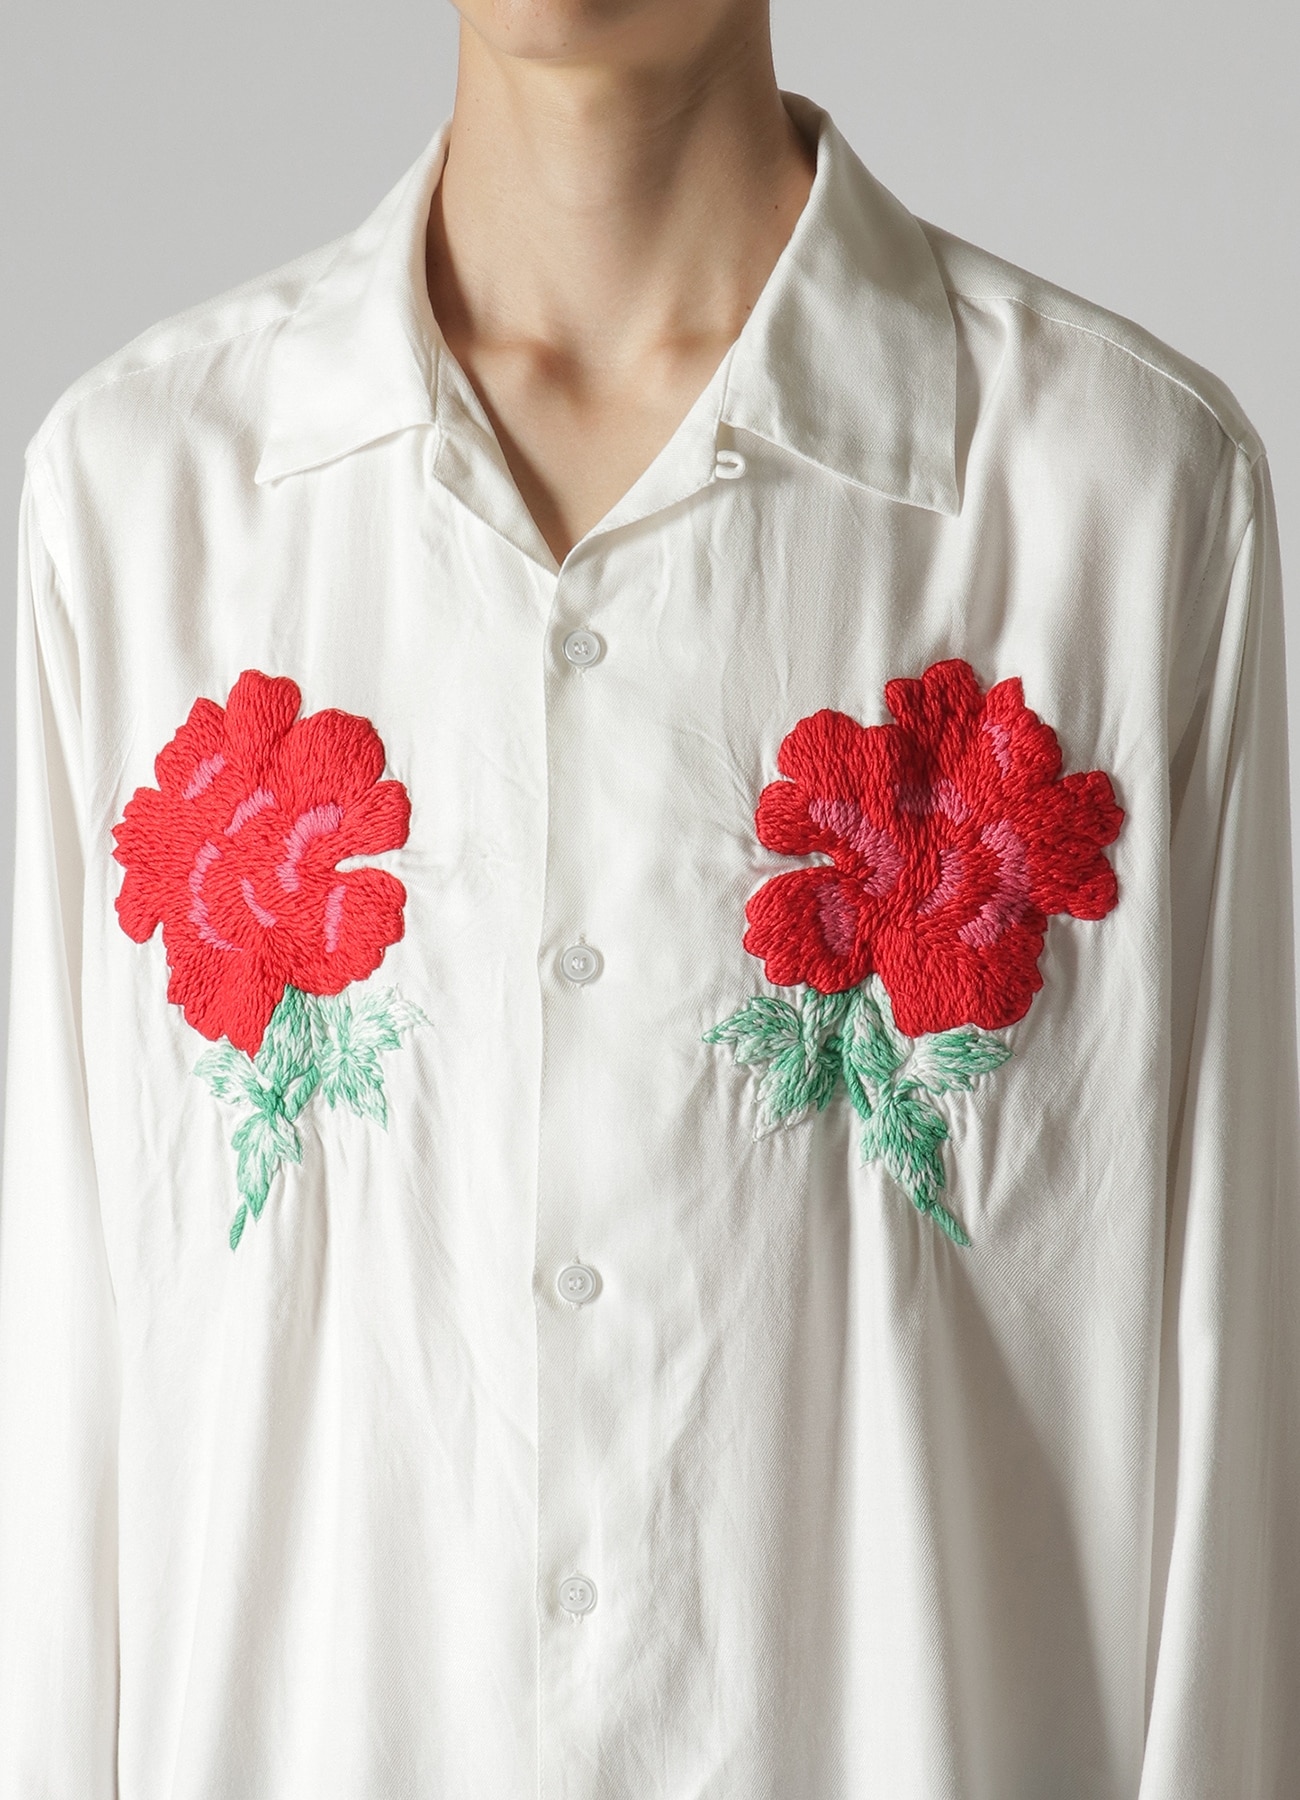 WILDSIDE × NOMA t.d. HAND EMBROIDERY Shirt(M WHITE): NOMAbloc 